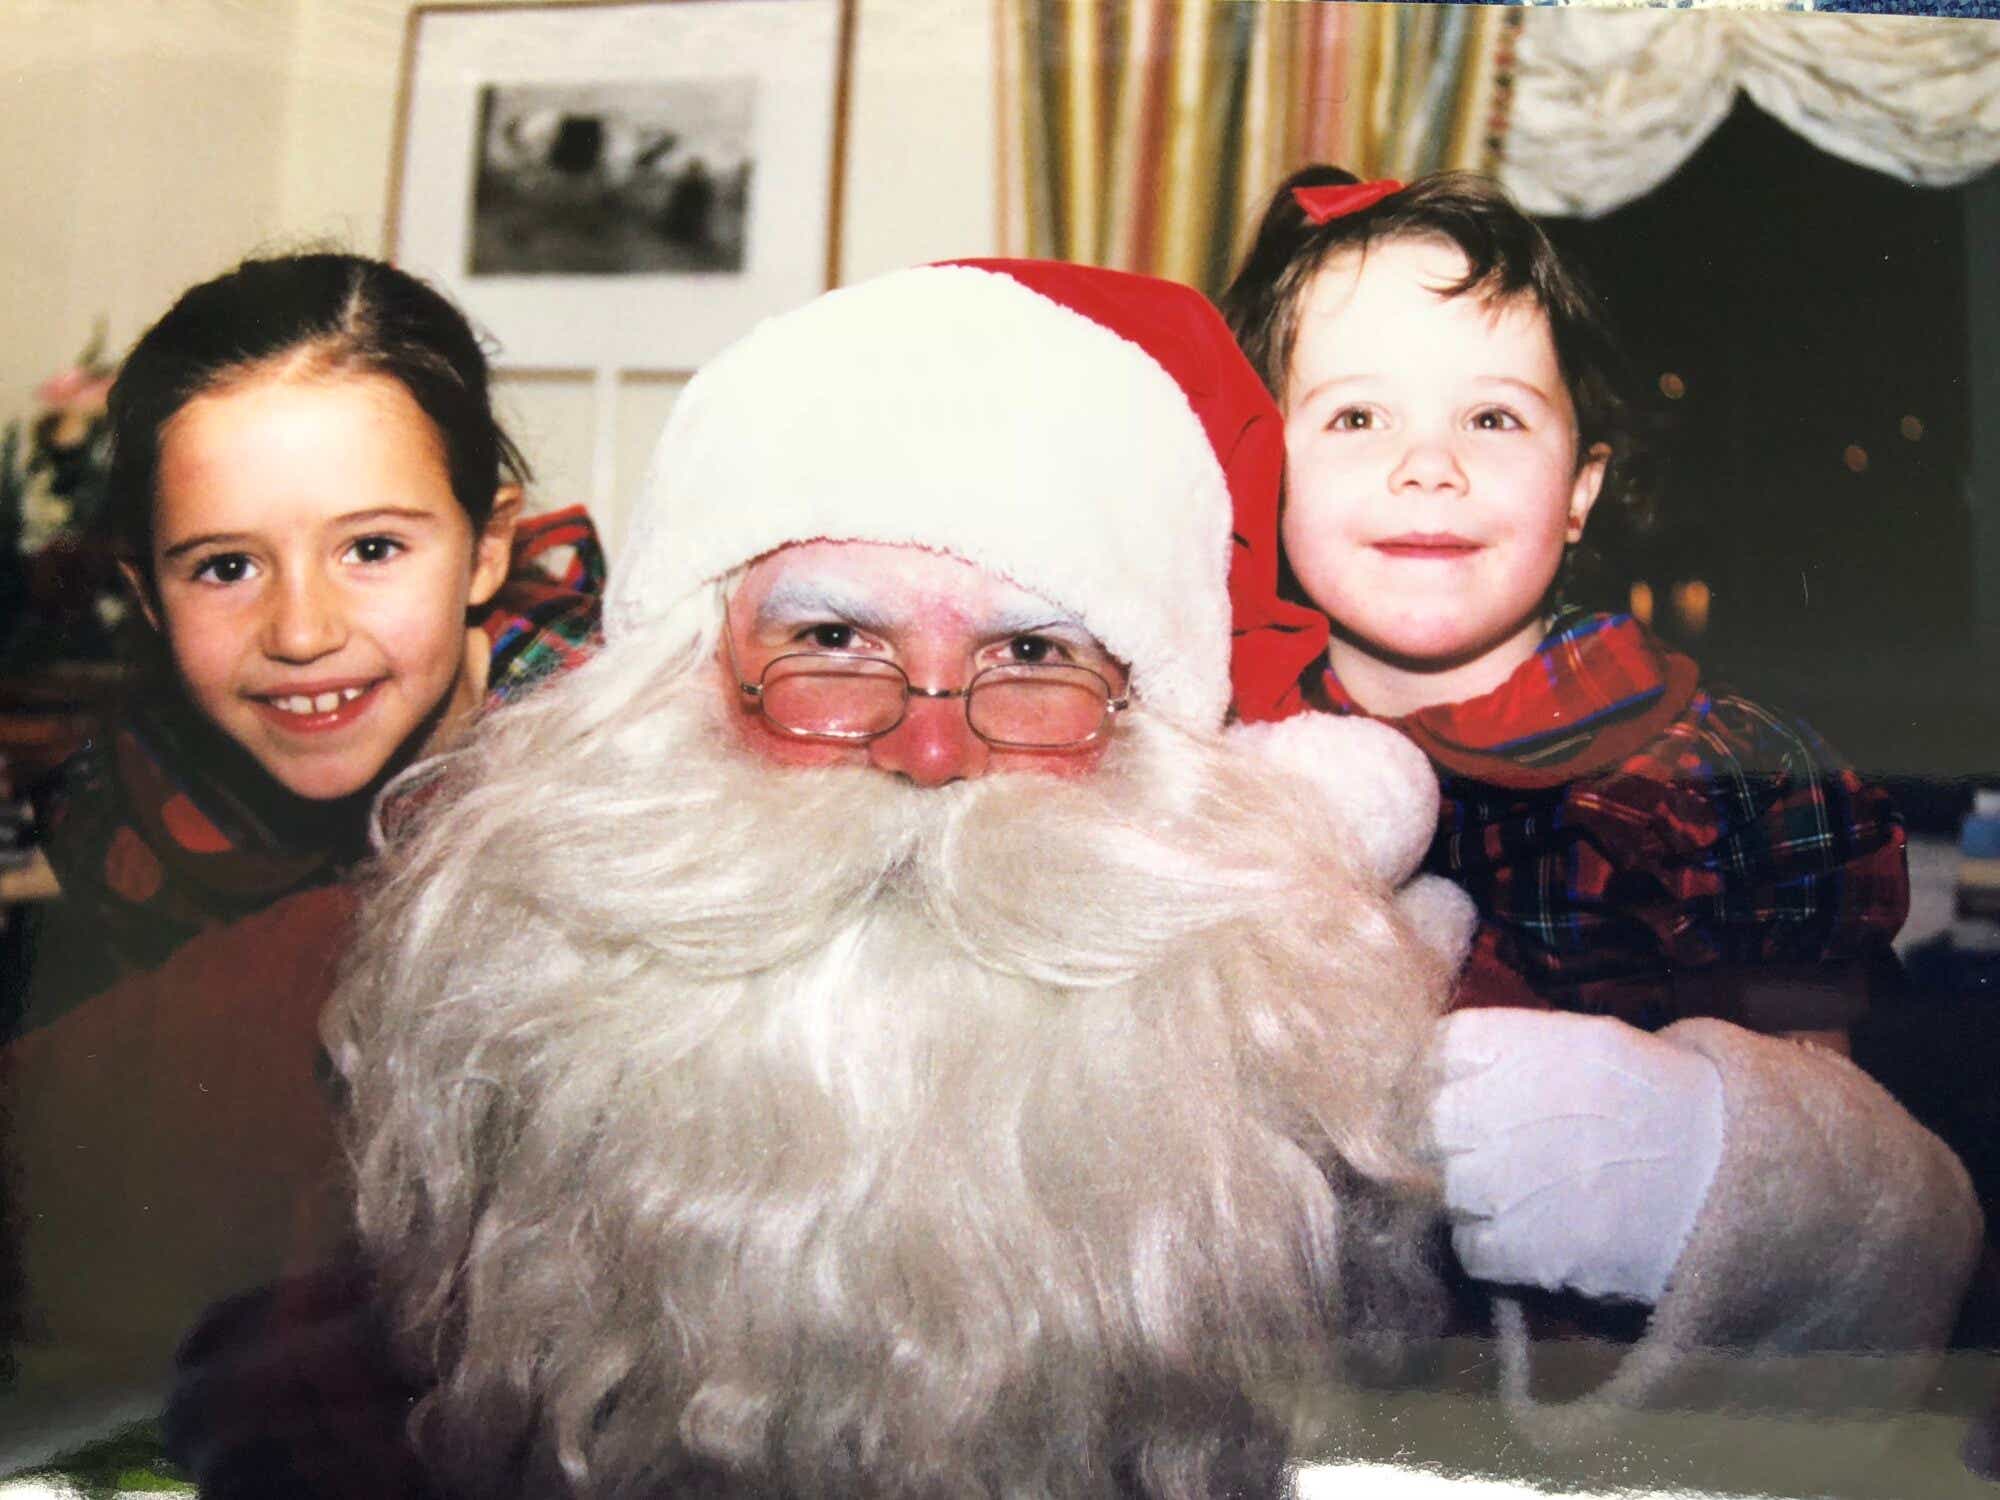 Carrie and Ellie with Santa